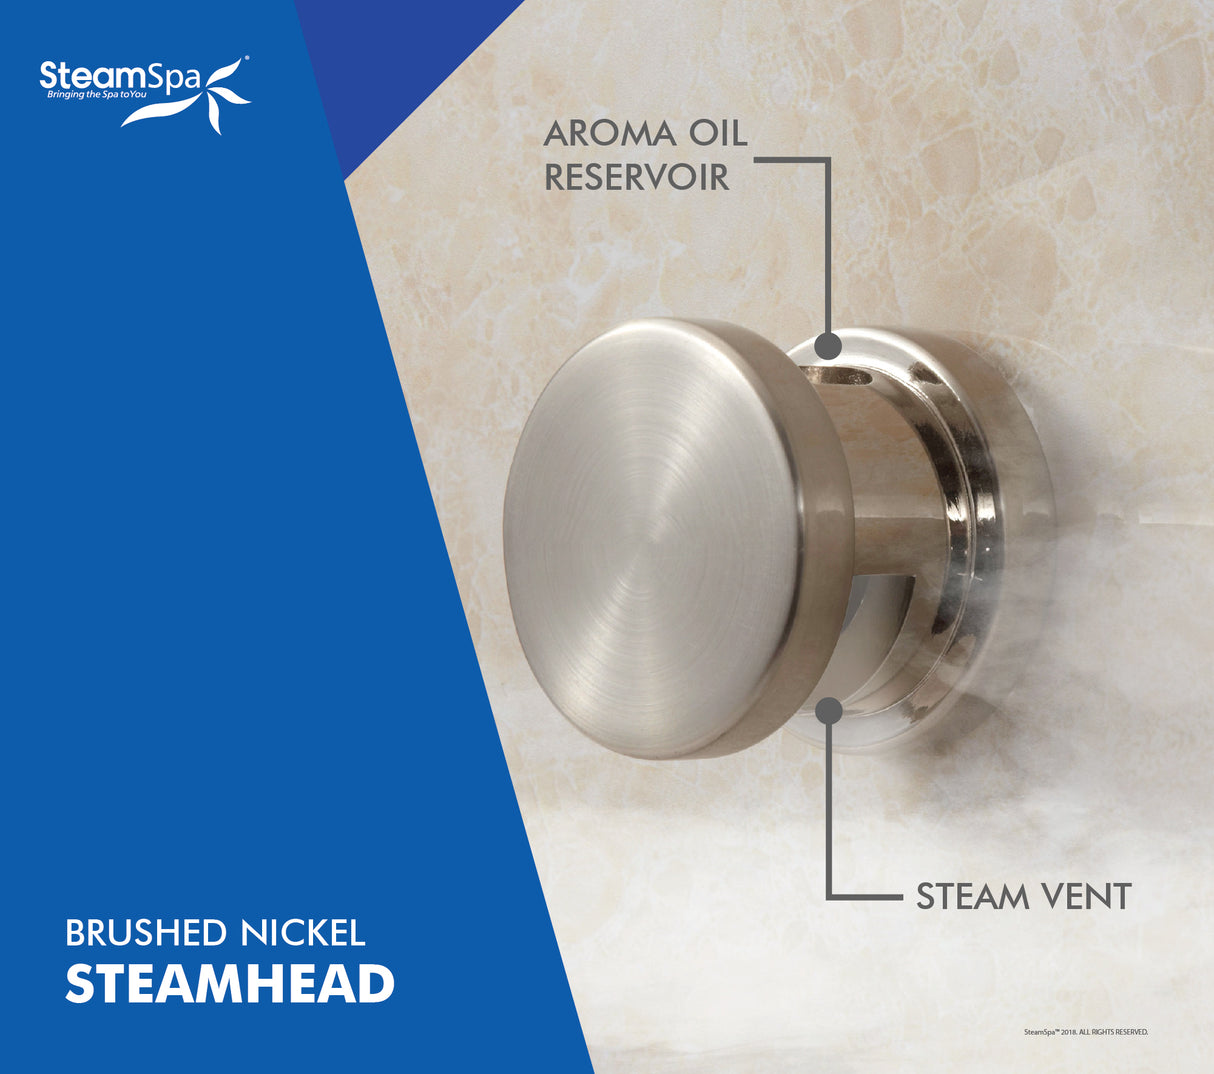 SteamSpa Oasis 7.5 KW QuickStart Acu-Steam Bath Generator Package with Built-in Auto Drain in Brushed Nickel OAT750BN-A